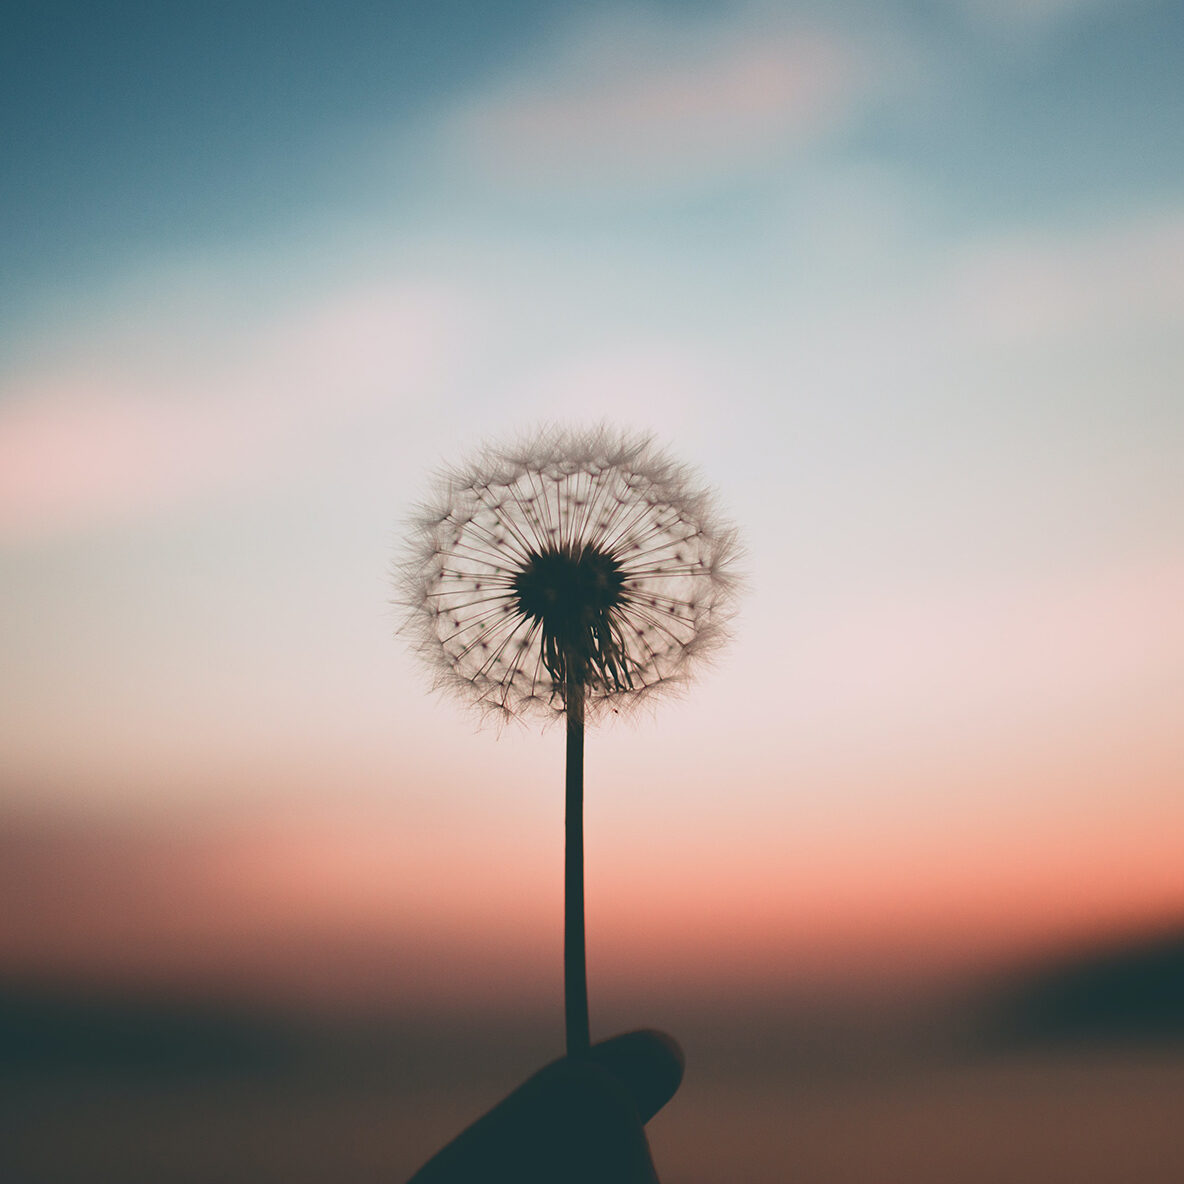 Dandelion being held and framed by the sunset in the distance representing the fragility of life responders deal with daily and the need for Therapy for First Responders in Kentucky.